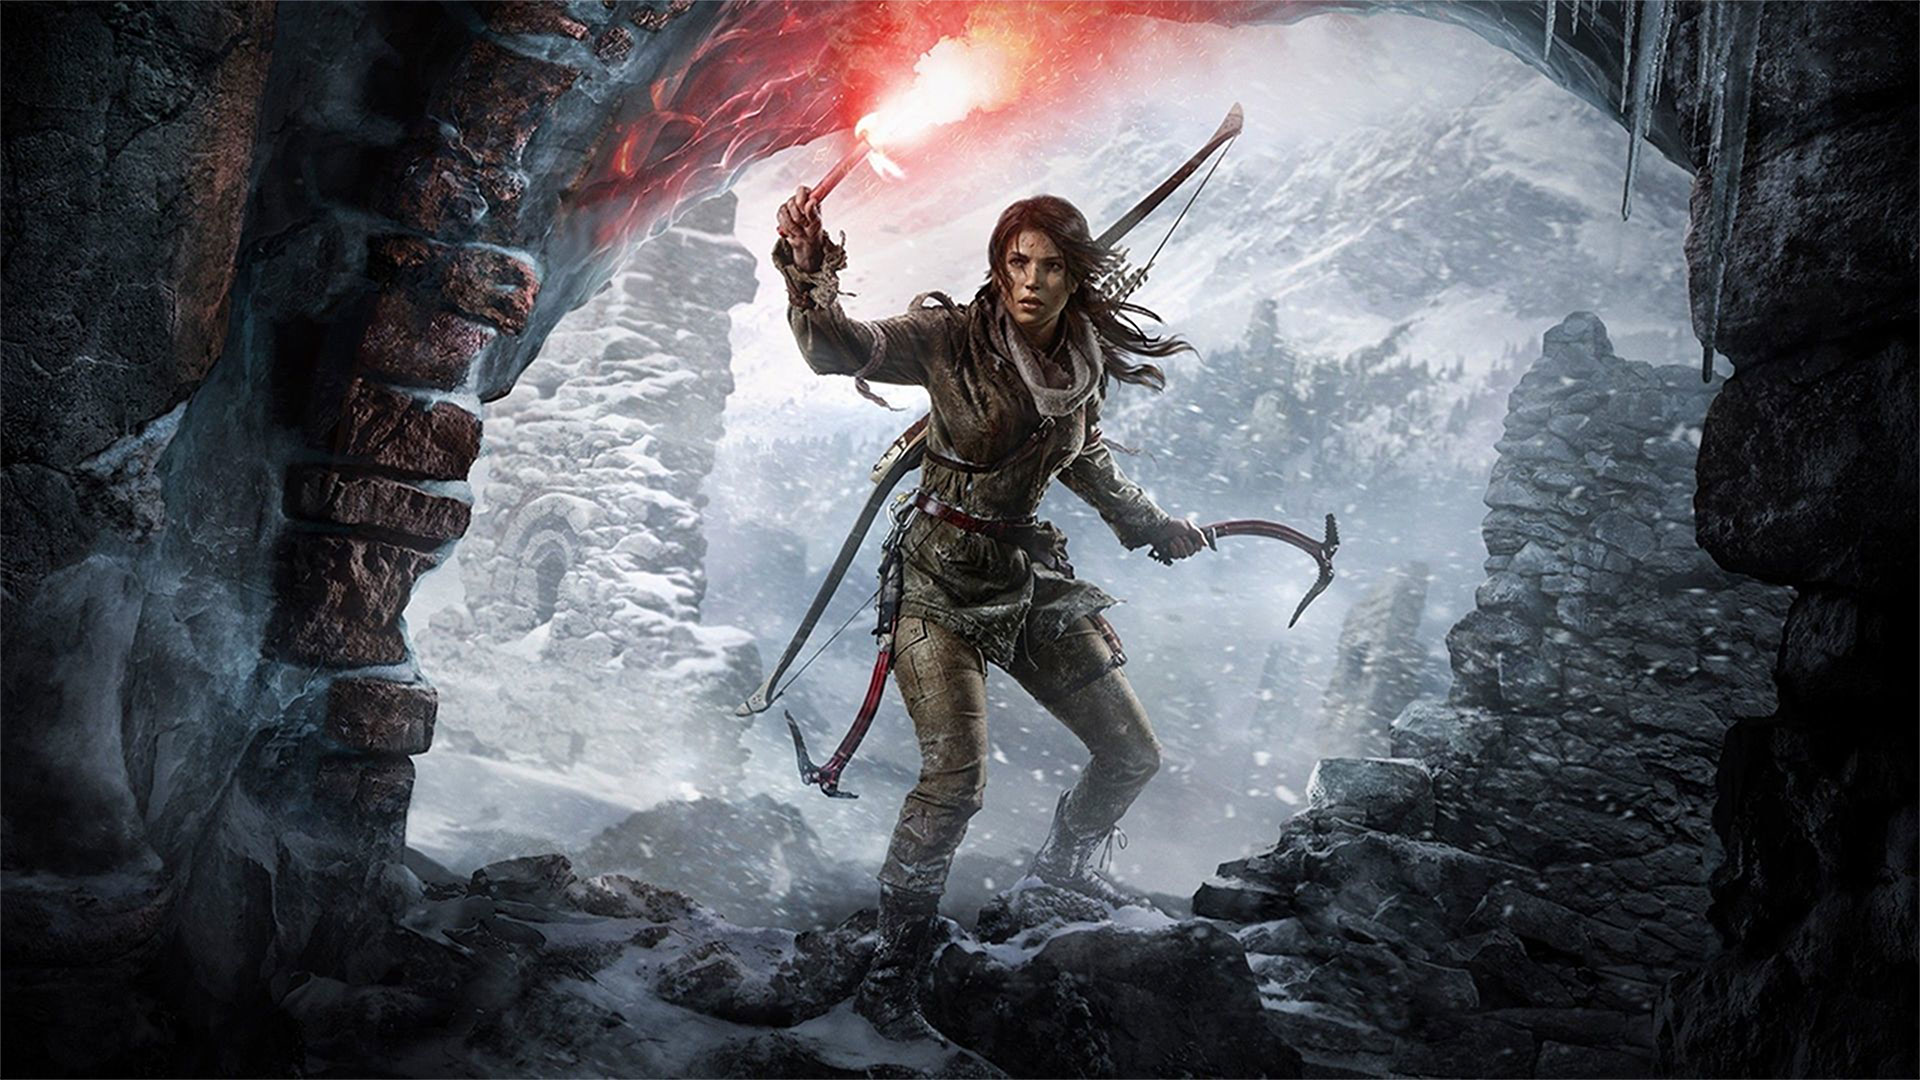 Square Enix celebrates Tomb Raider's 25th anniversary with new franchise announcements